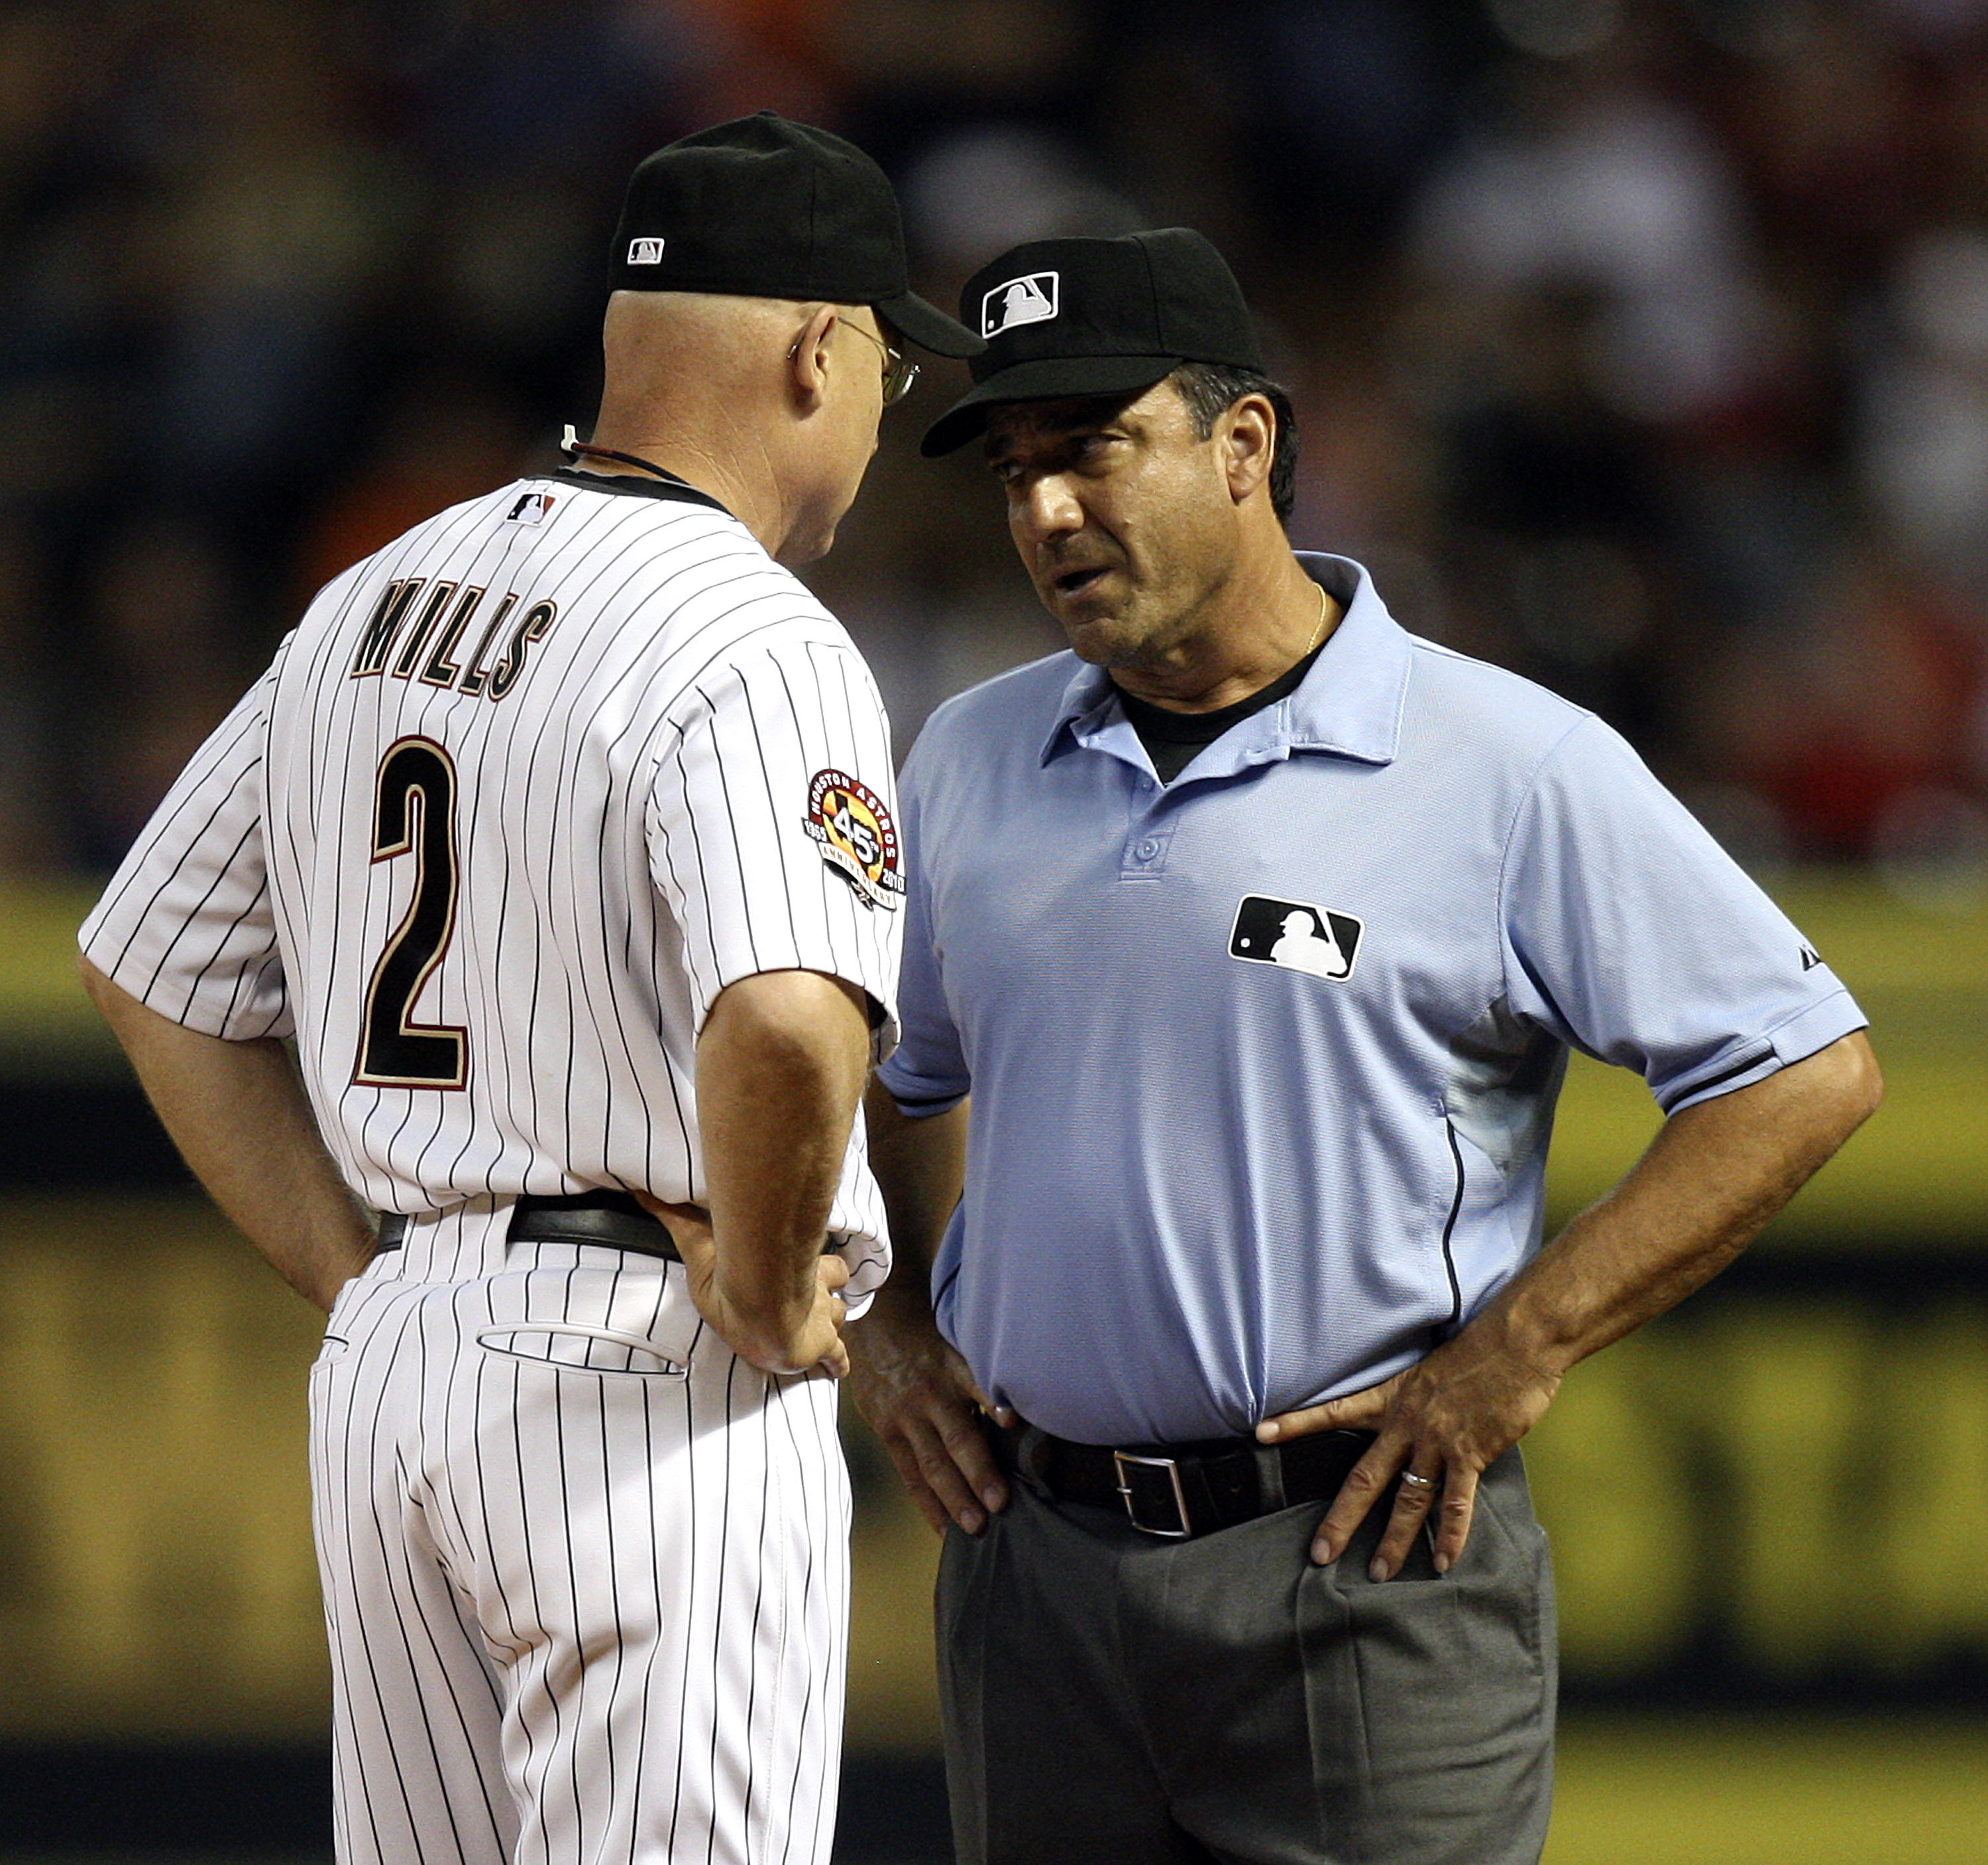 MLB needs to suspend terrible umpires who are ruining the game